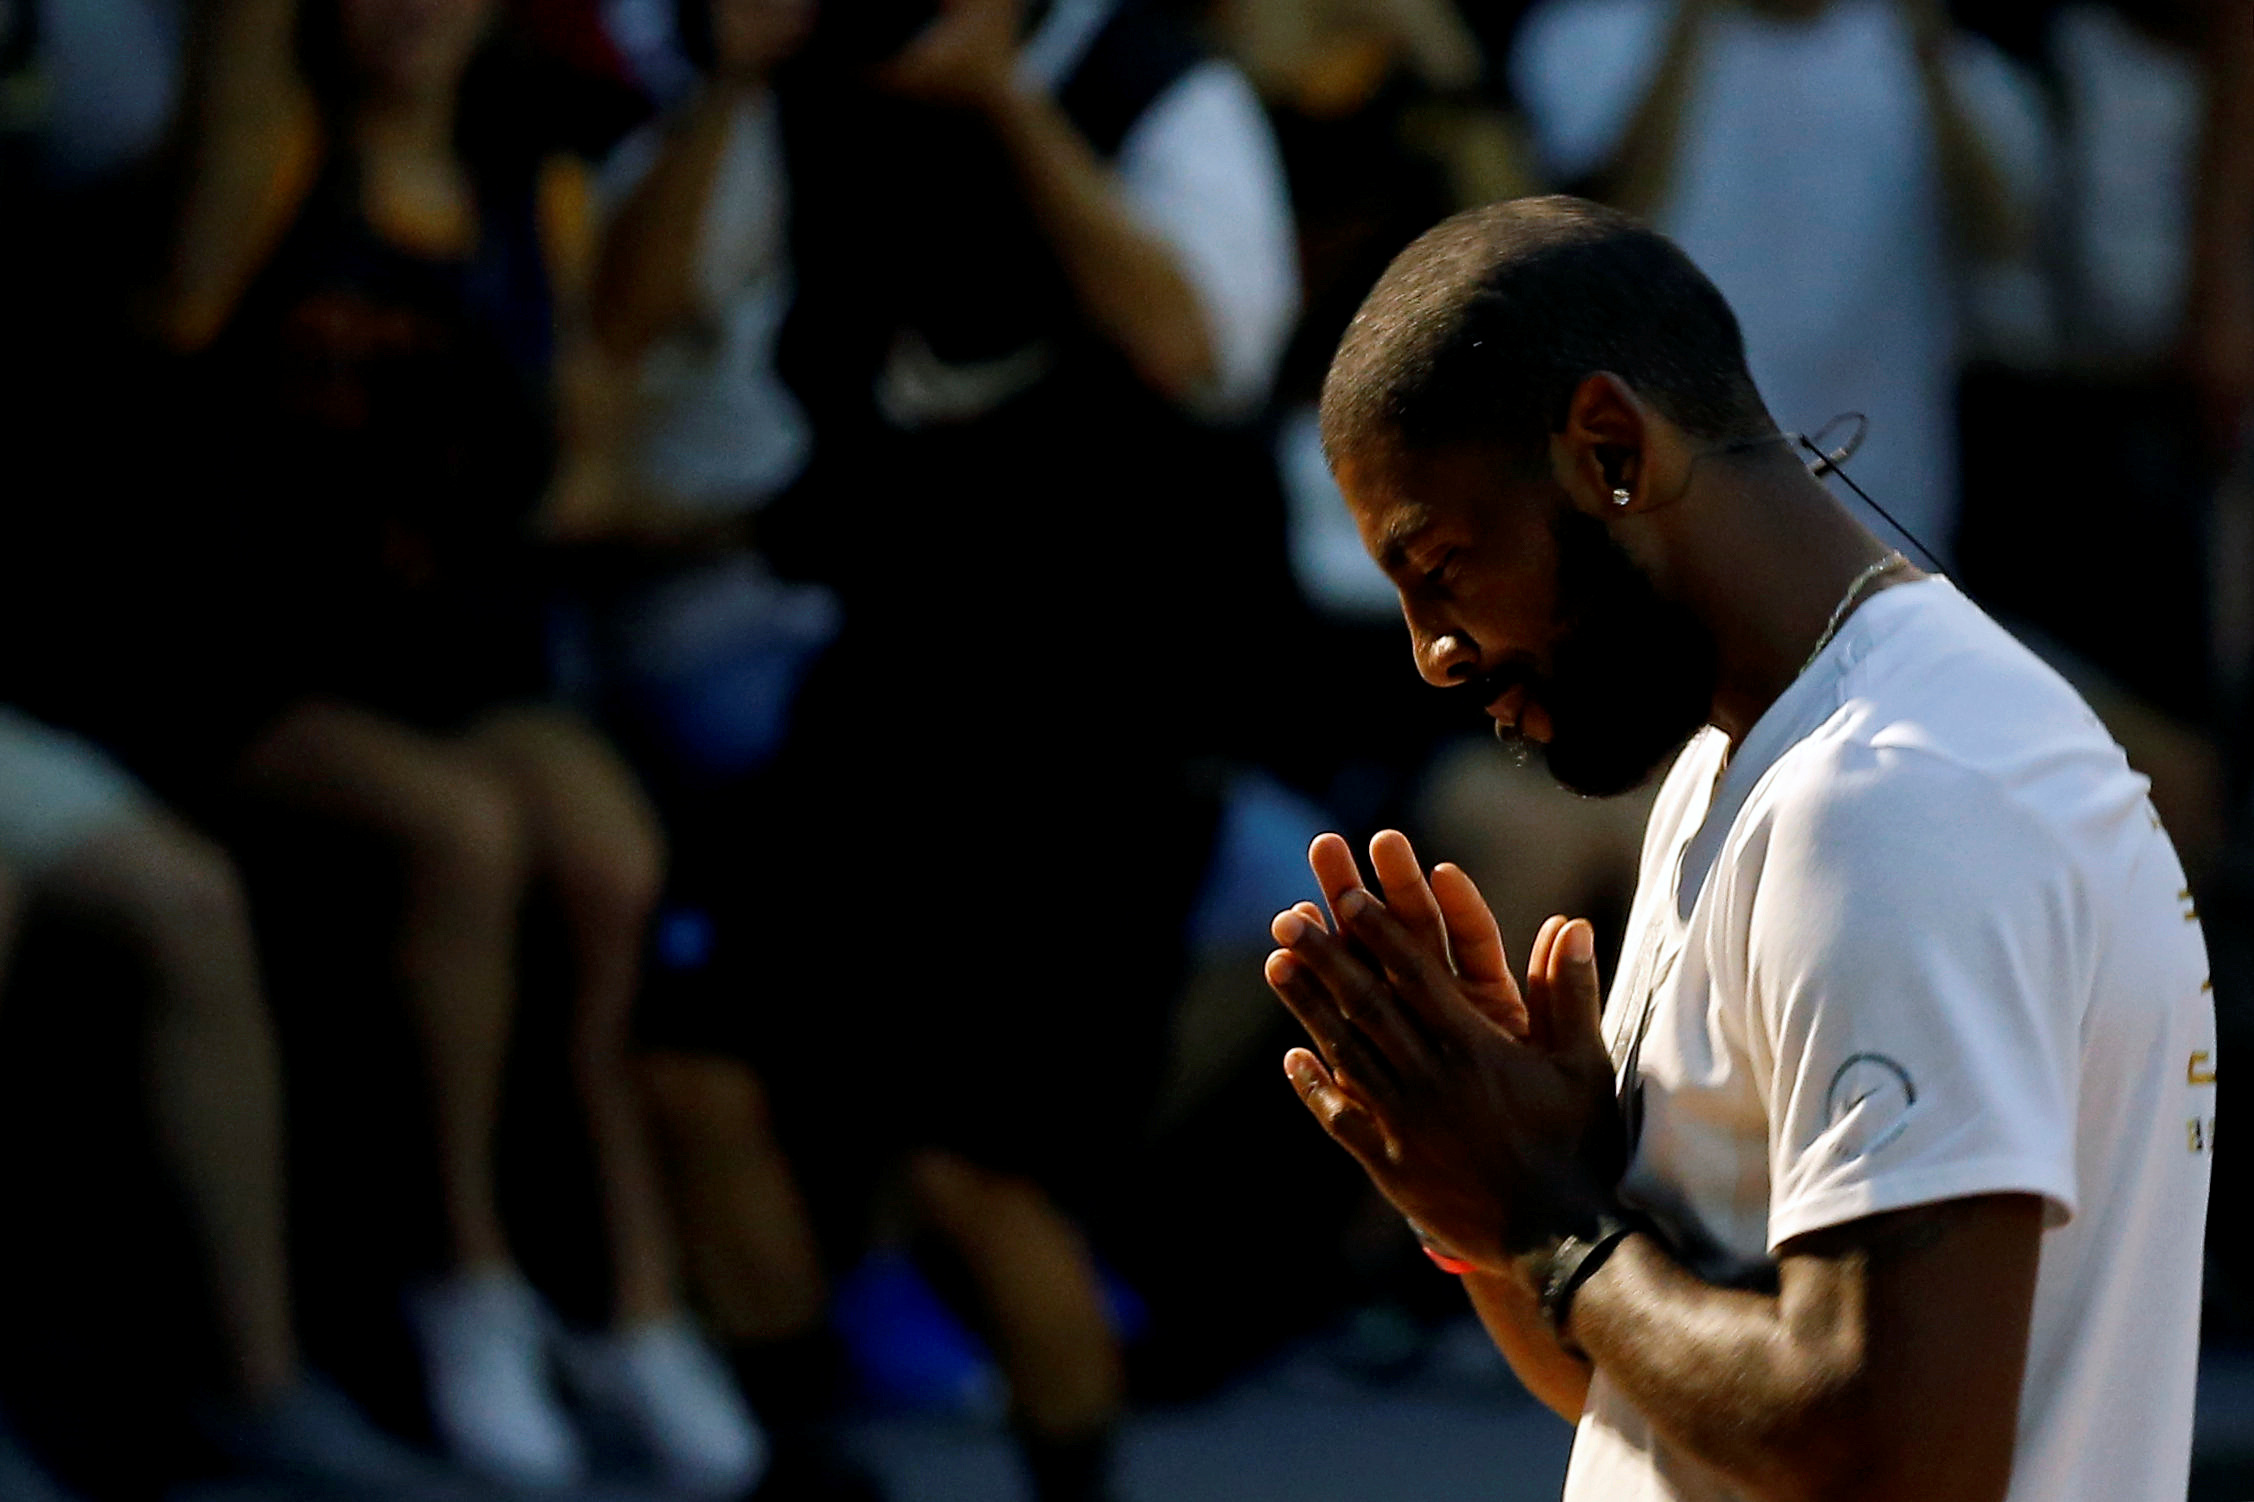 NBA player Kyrie Irving of the Cleveland Cavaliers reacts during a promotional event in Taipei